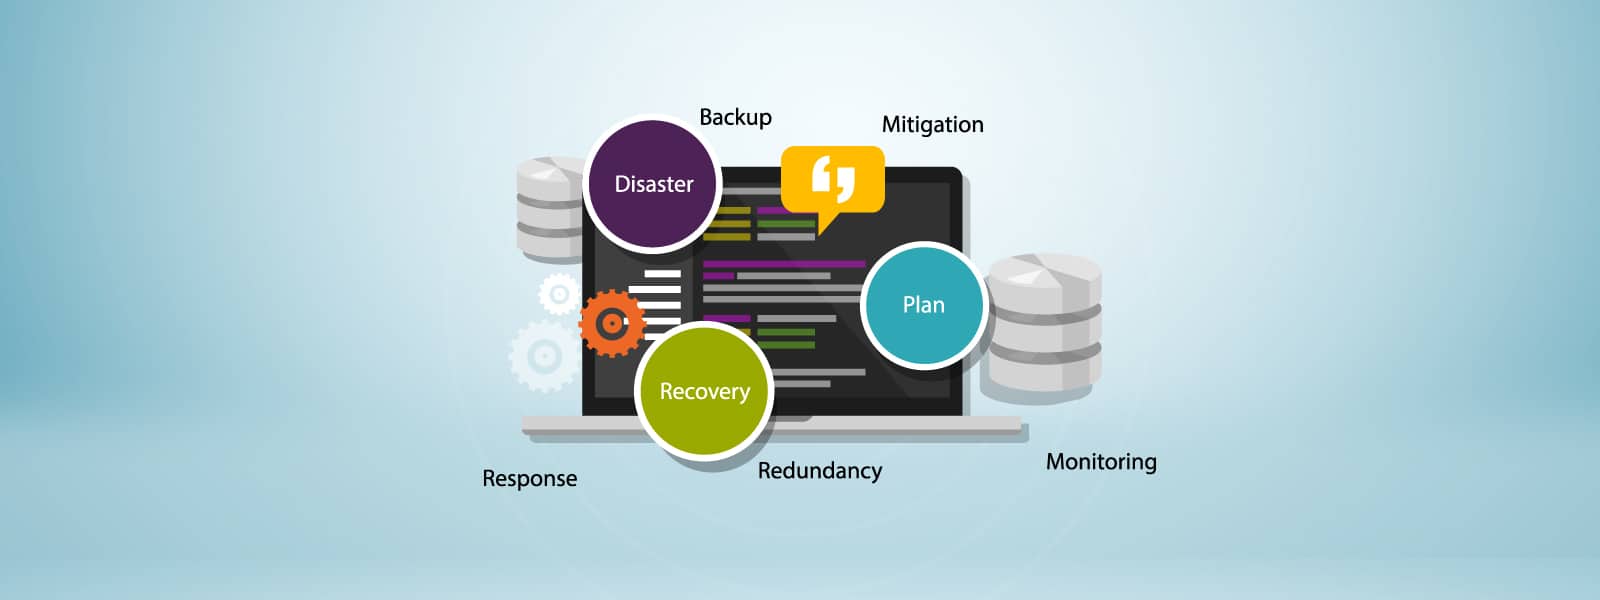 Plan for Disaster Recovery